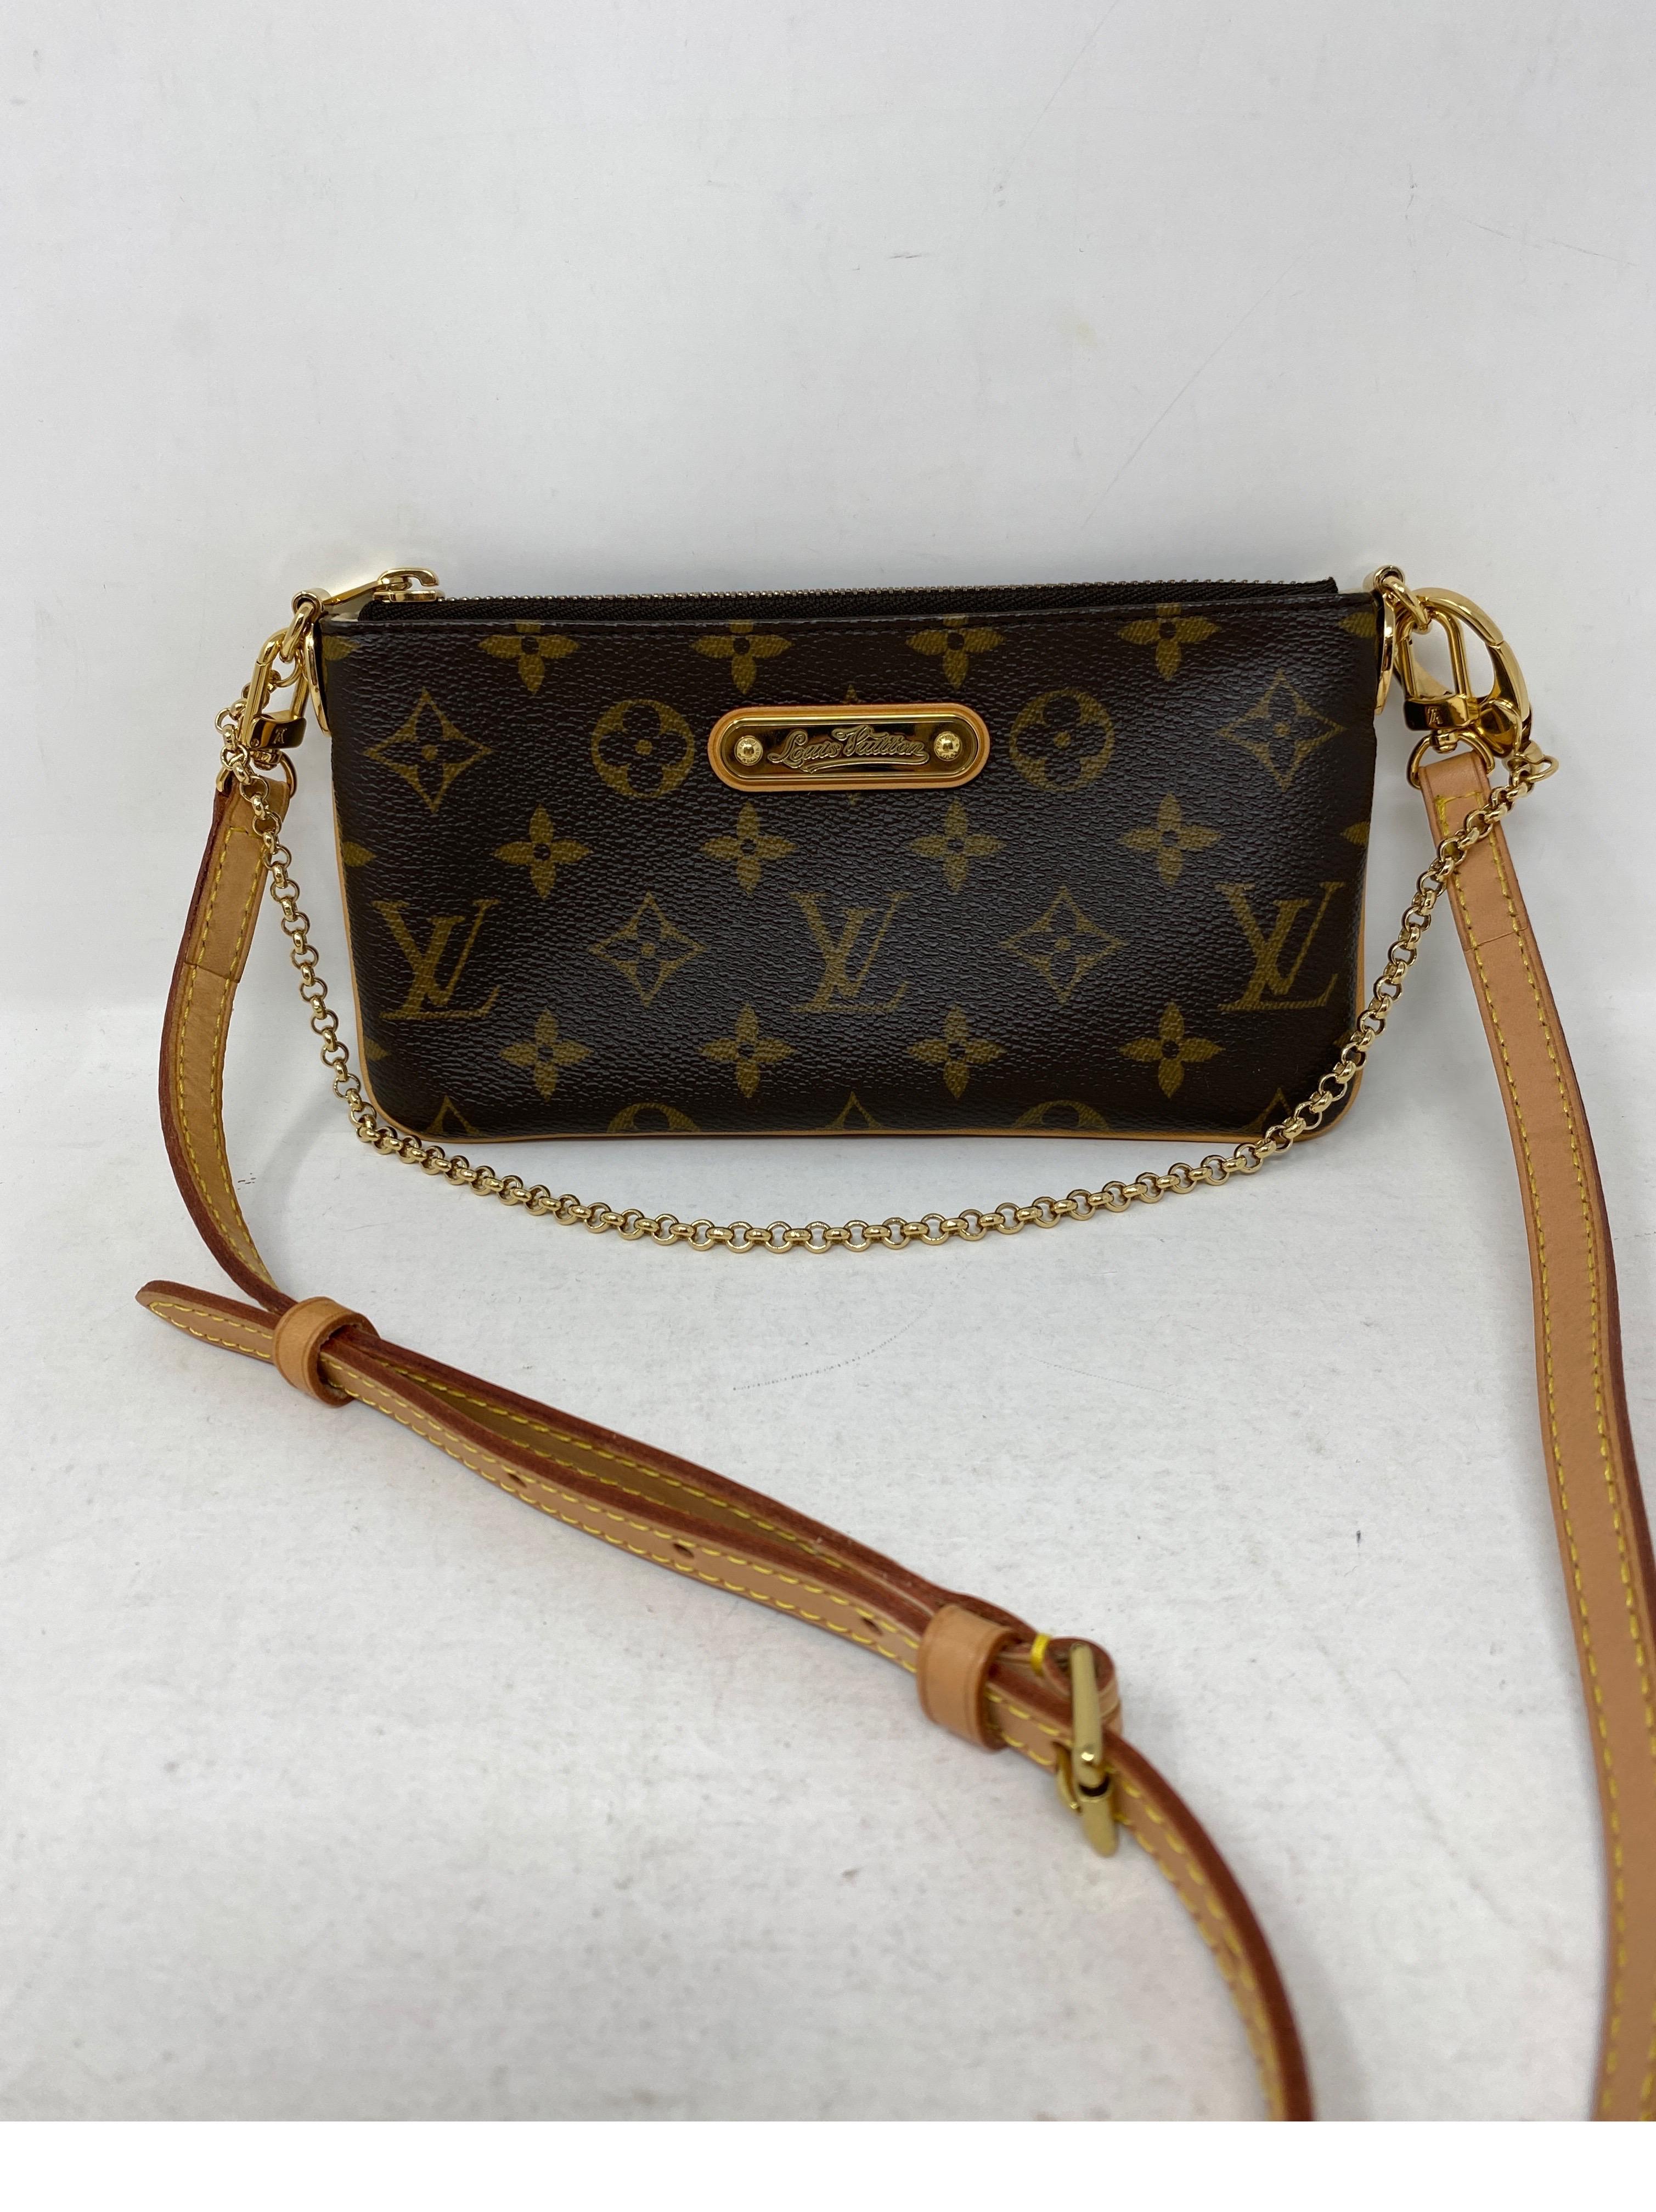 Louis Vuitton Milla Crossbody Bag. Retired style from LV. Mint like new condition. Can be worn as a clutch or as a crossbody. Guaranteed authentic. 